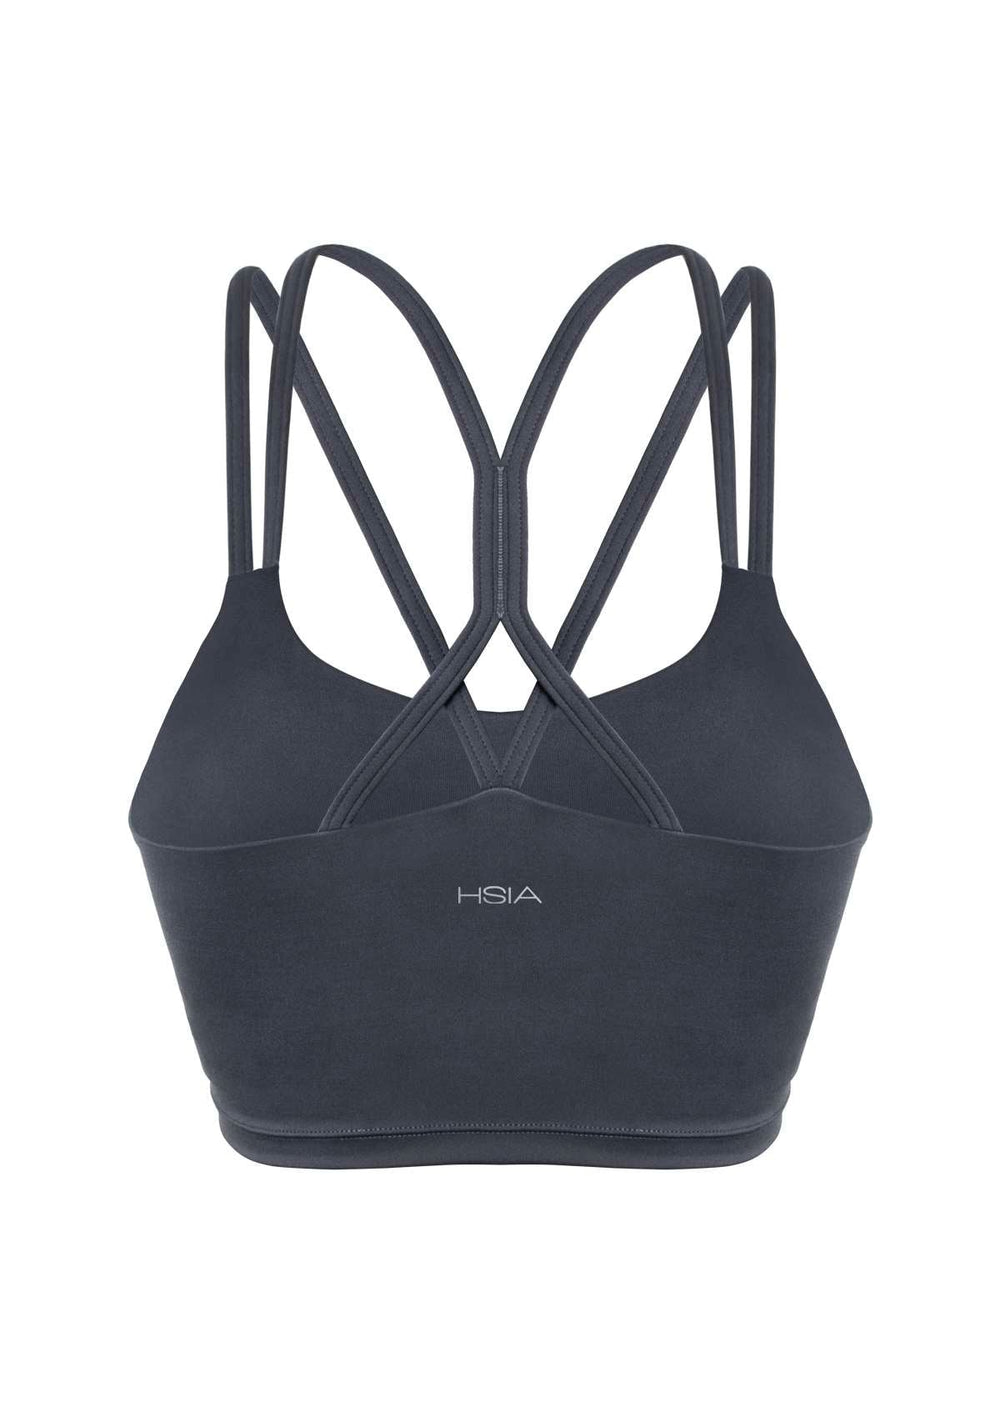 1pc Black Hollow Mesh Sports Bra With Breathable Holes, S-3xl, For